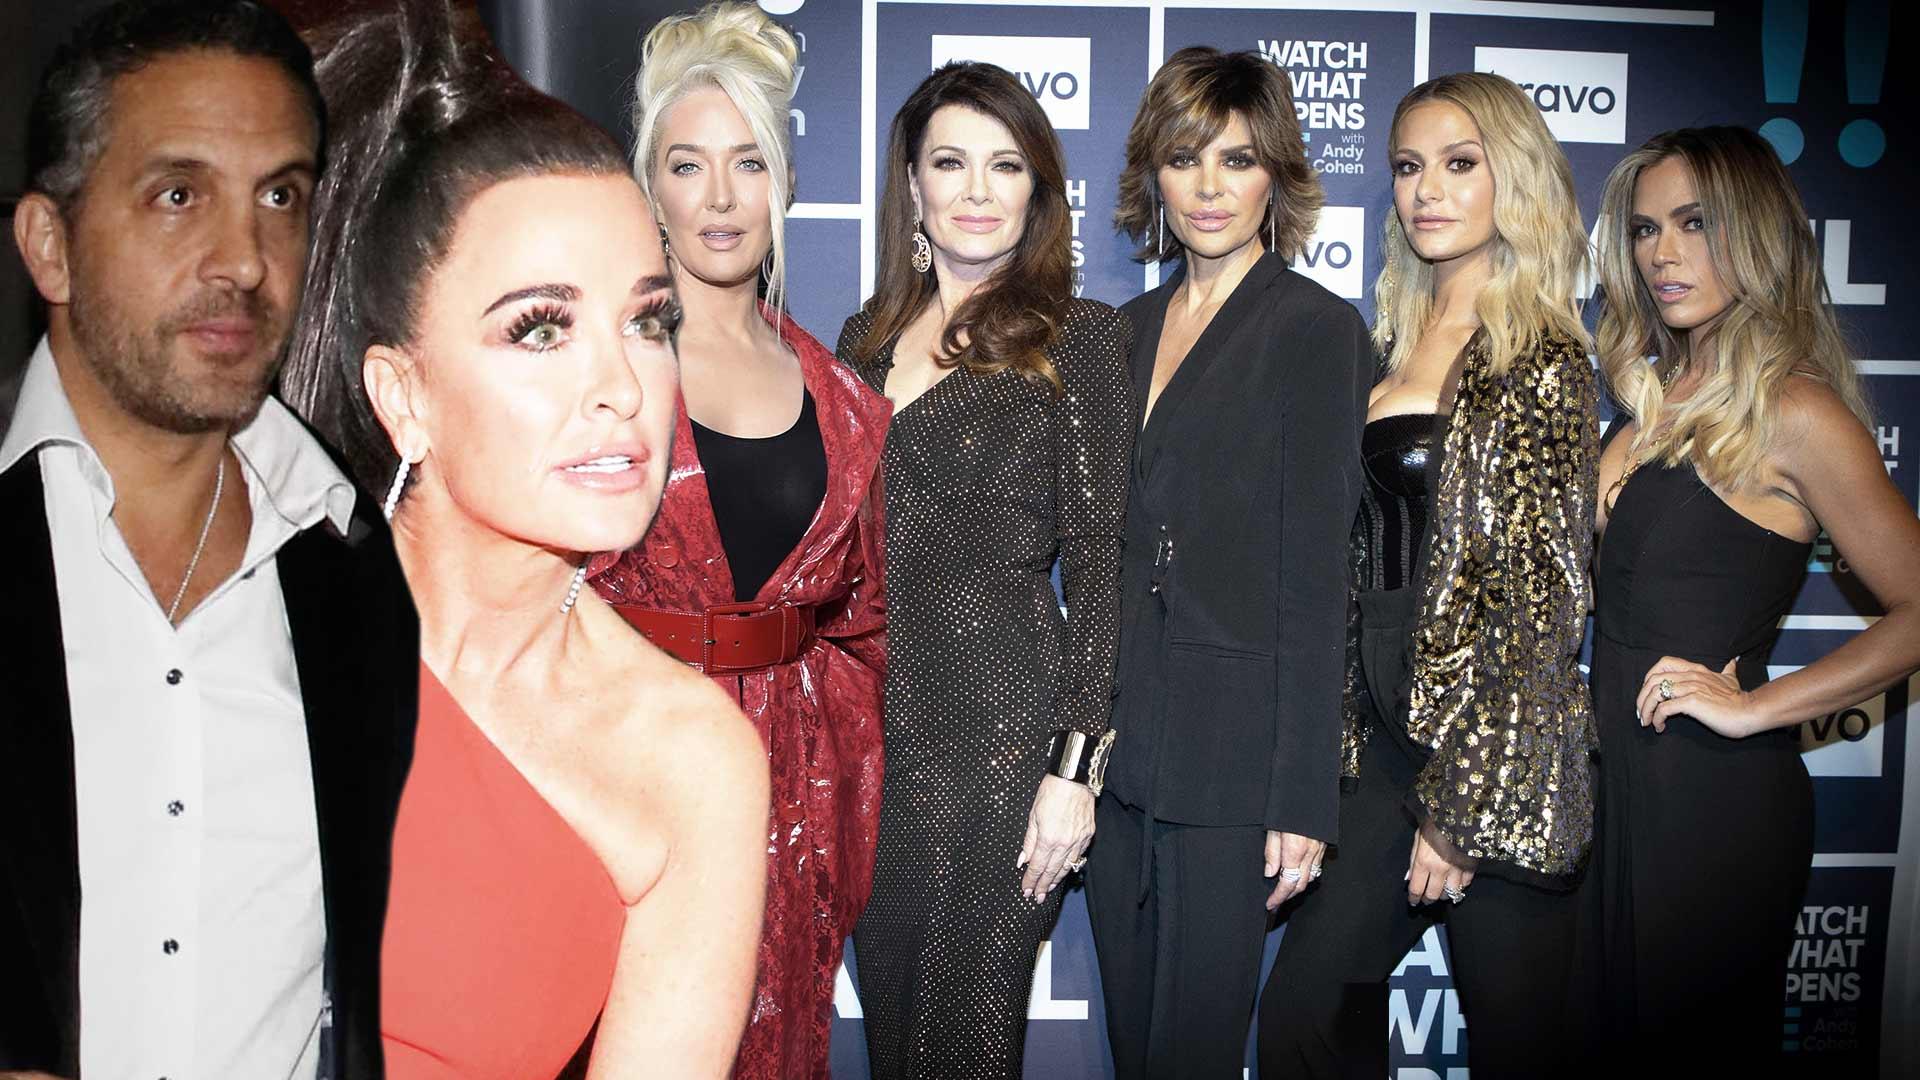 Kyle Richards and Her ‘RHOBH’ Co-Stars to Be Dragged Into Her Husband’s $32 Million Legal Battle